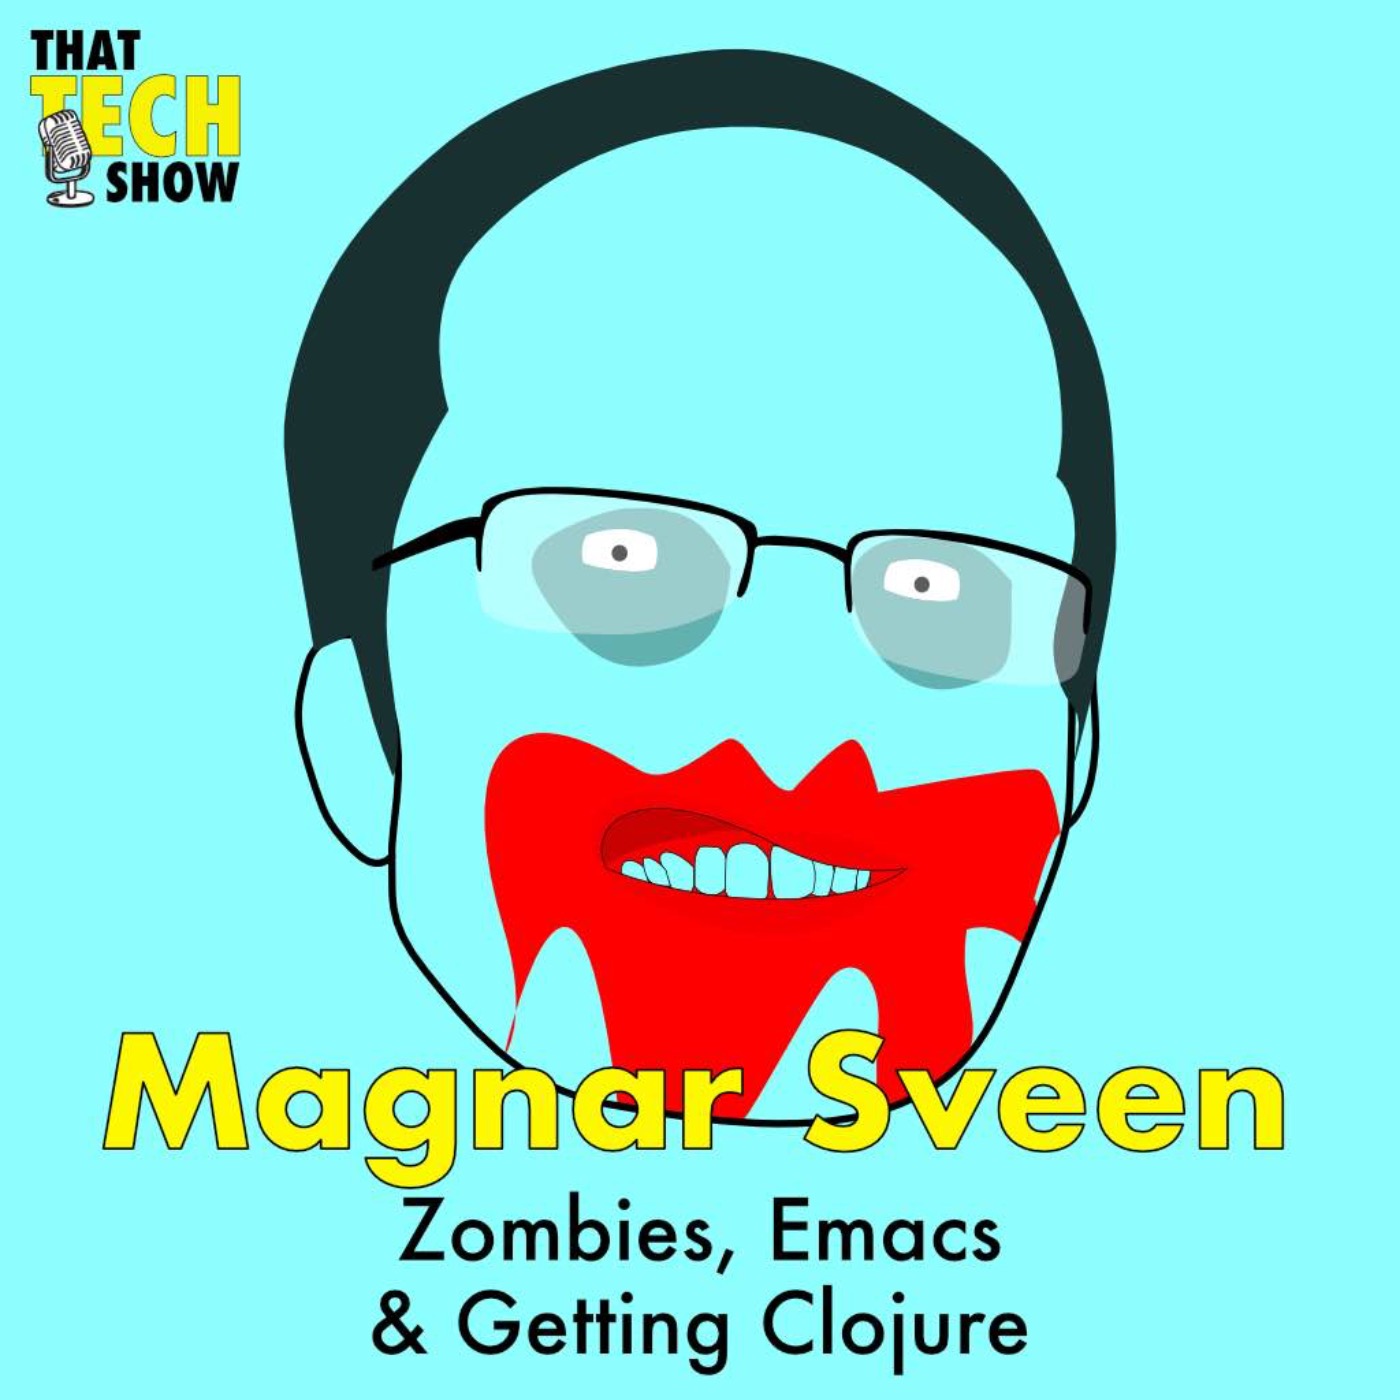 Episode 37 - Zombies, Emacs and Getting Clojure with Magnar Sveen